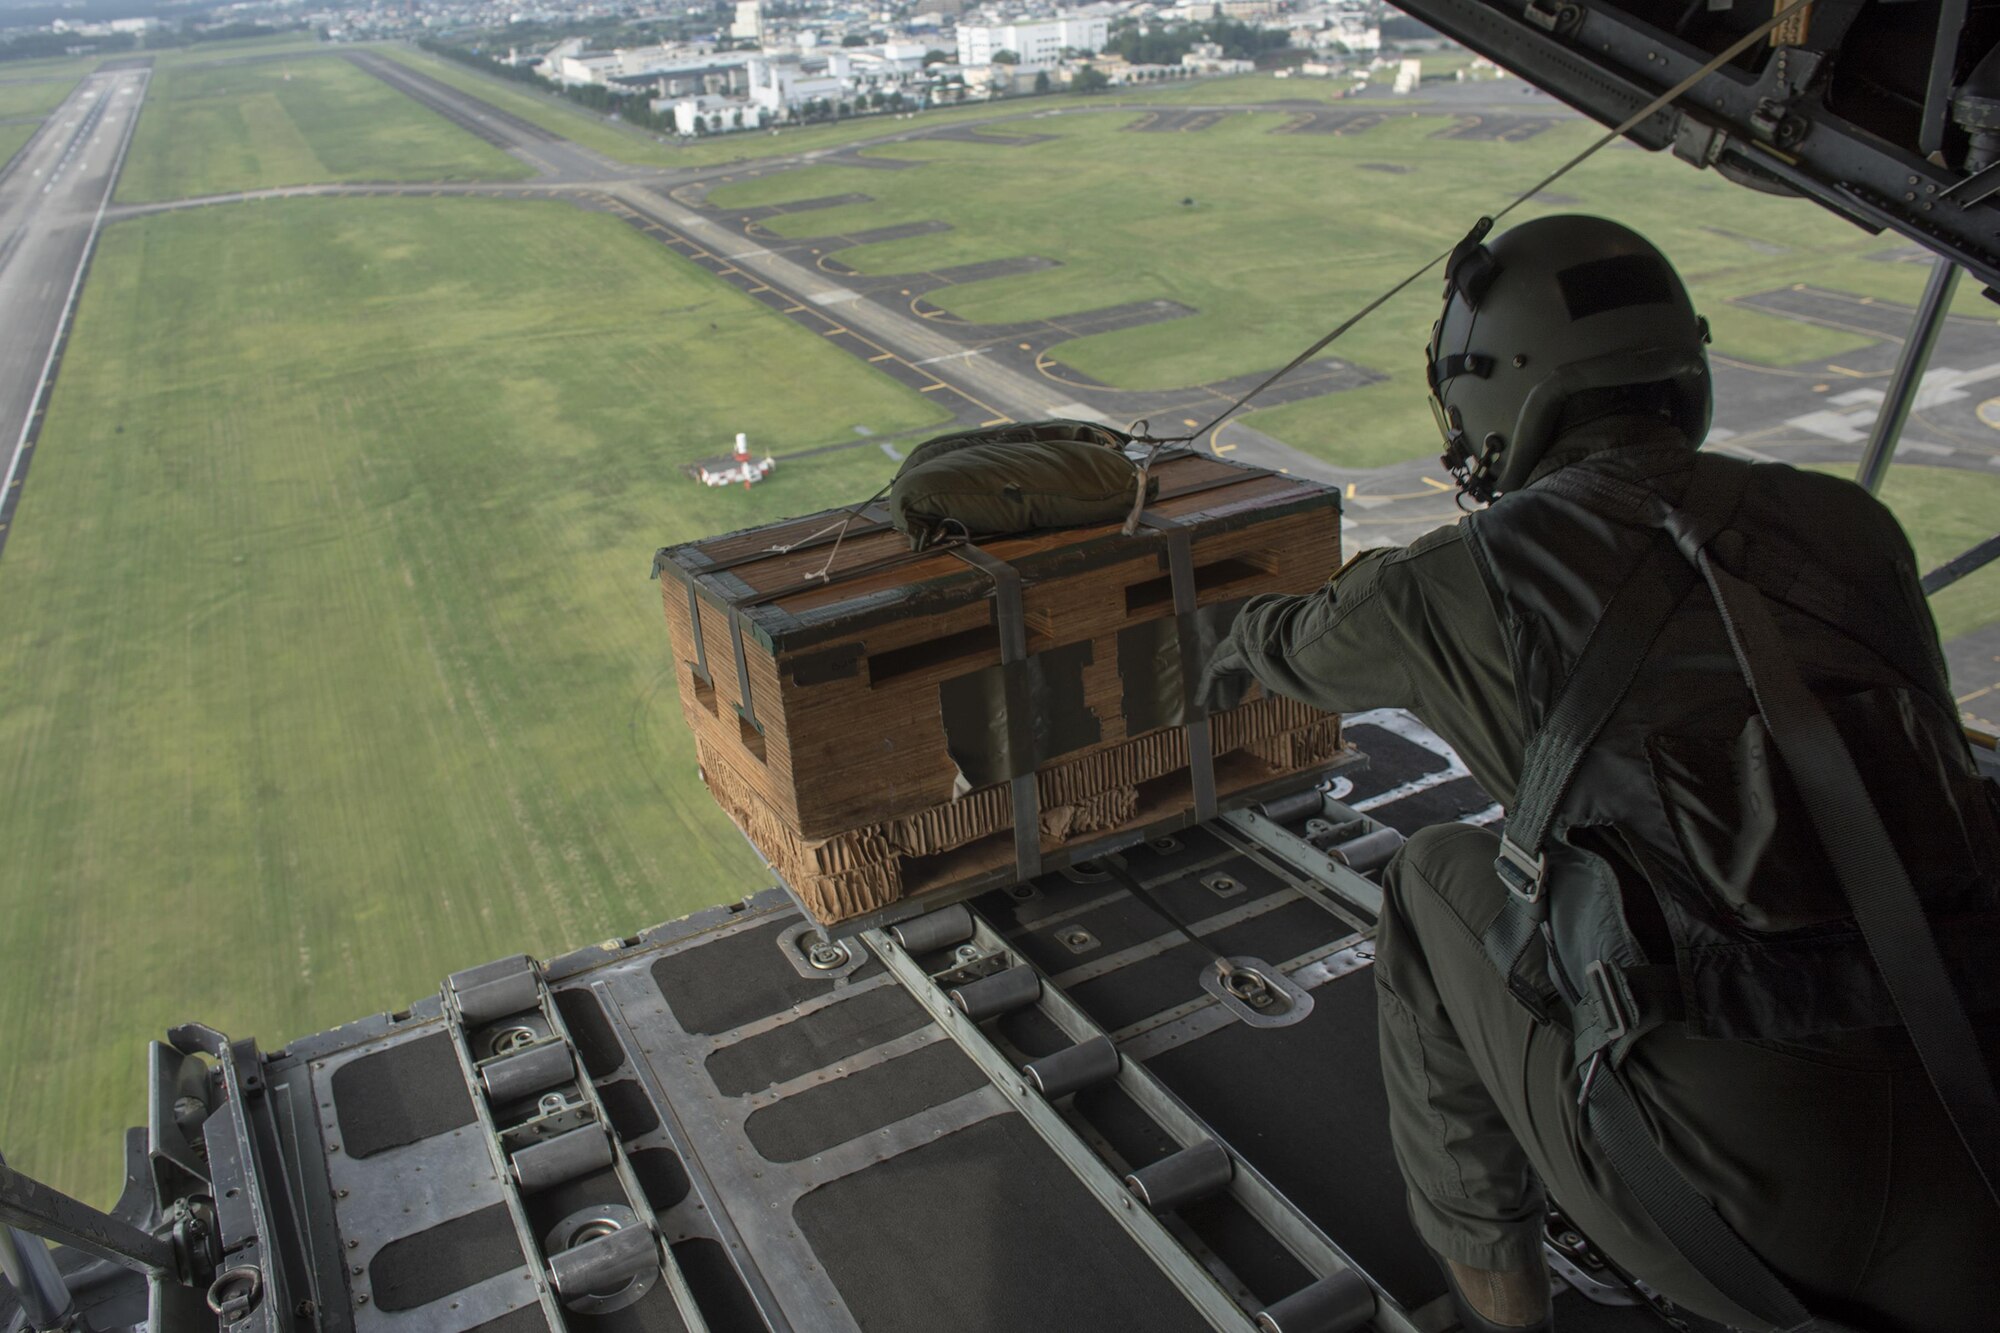 Senior Airman Andrew Fox, 36th Airlift Squadron C-130H loadmaster, drops a low-cost, low-altitude bundle over Yokota Air Base, Japan, Sept. 17, 2016, during the 2016 Japanese-American Friendship Festival. The 36 AS demonstrated their airdrop capabilities to festivalgoers. Yokota welcomed over 135,000 visitors for the festival. (U.S. Air Force photo by Yasuo Osakabe/Released)   